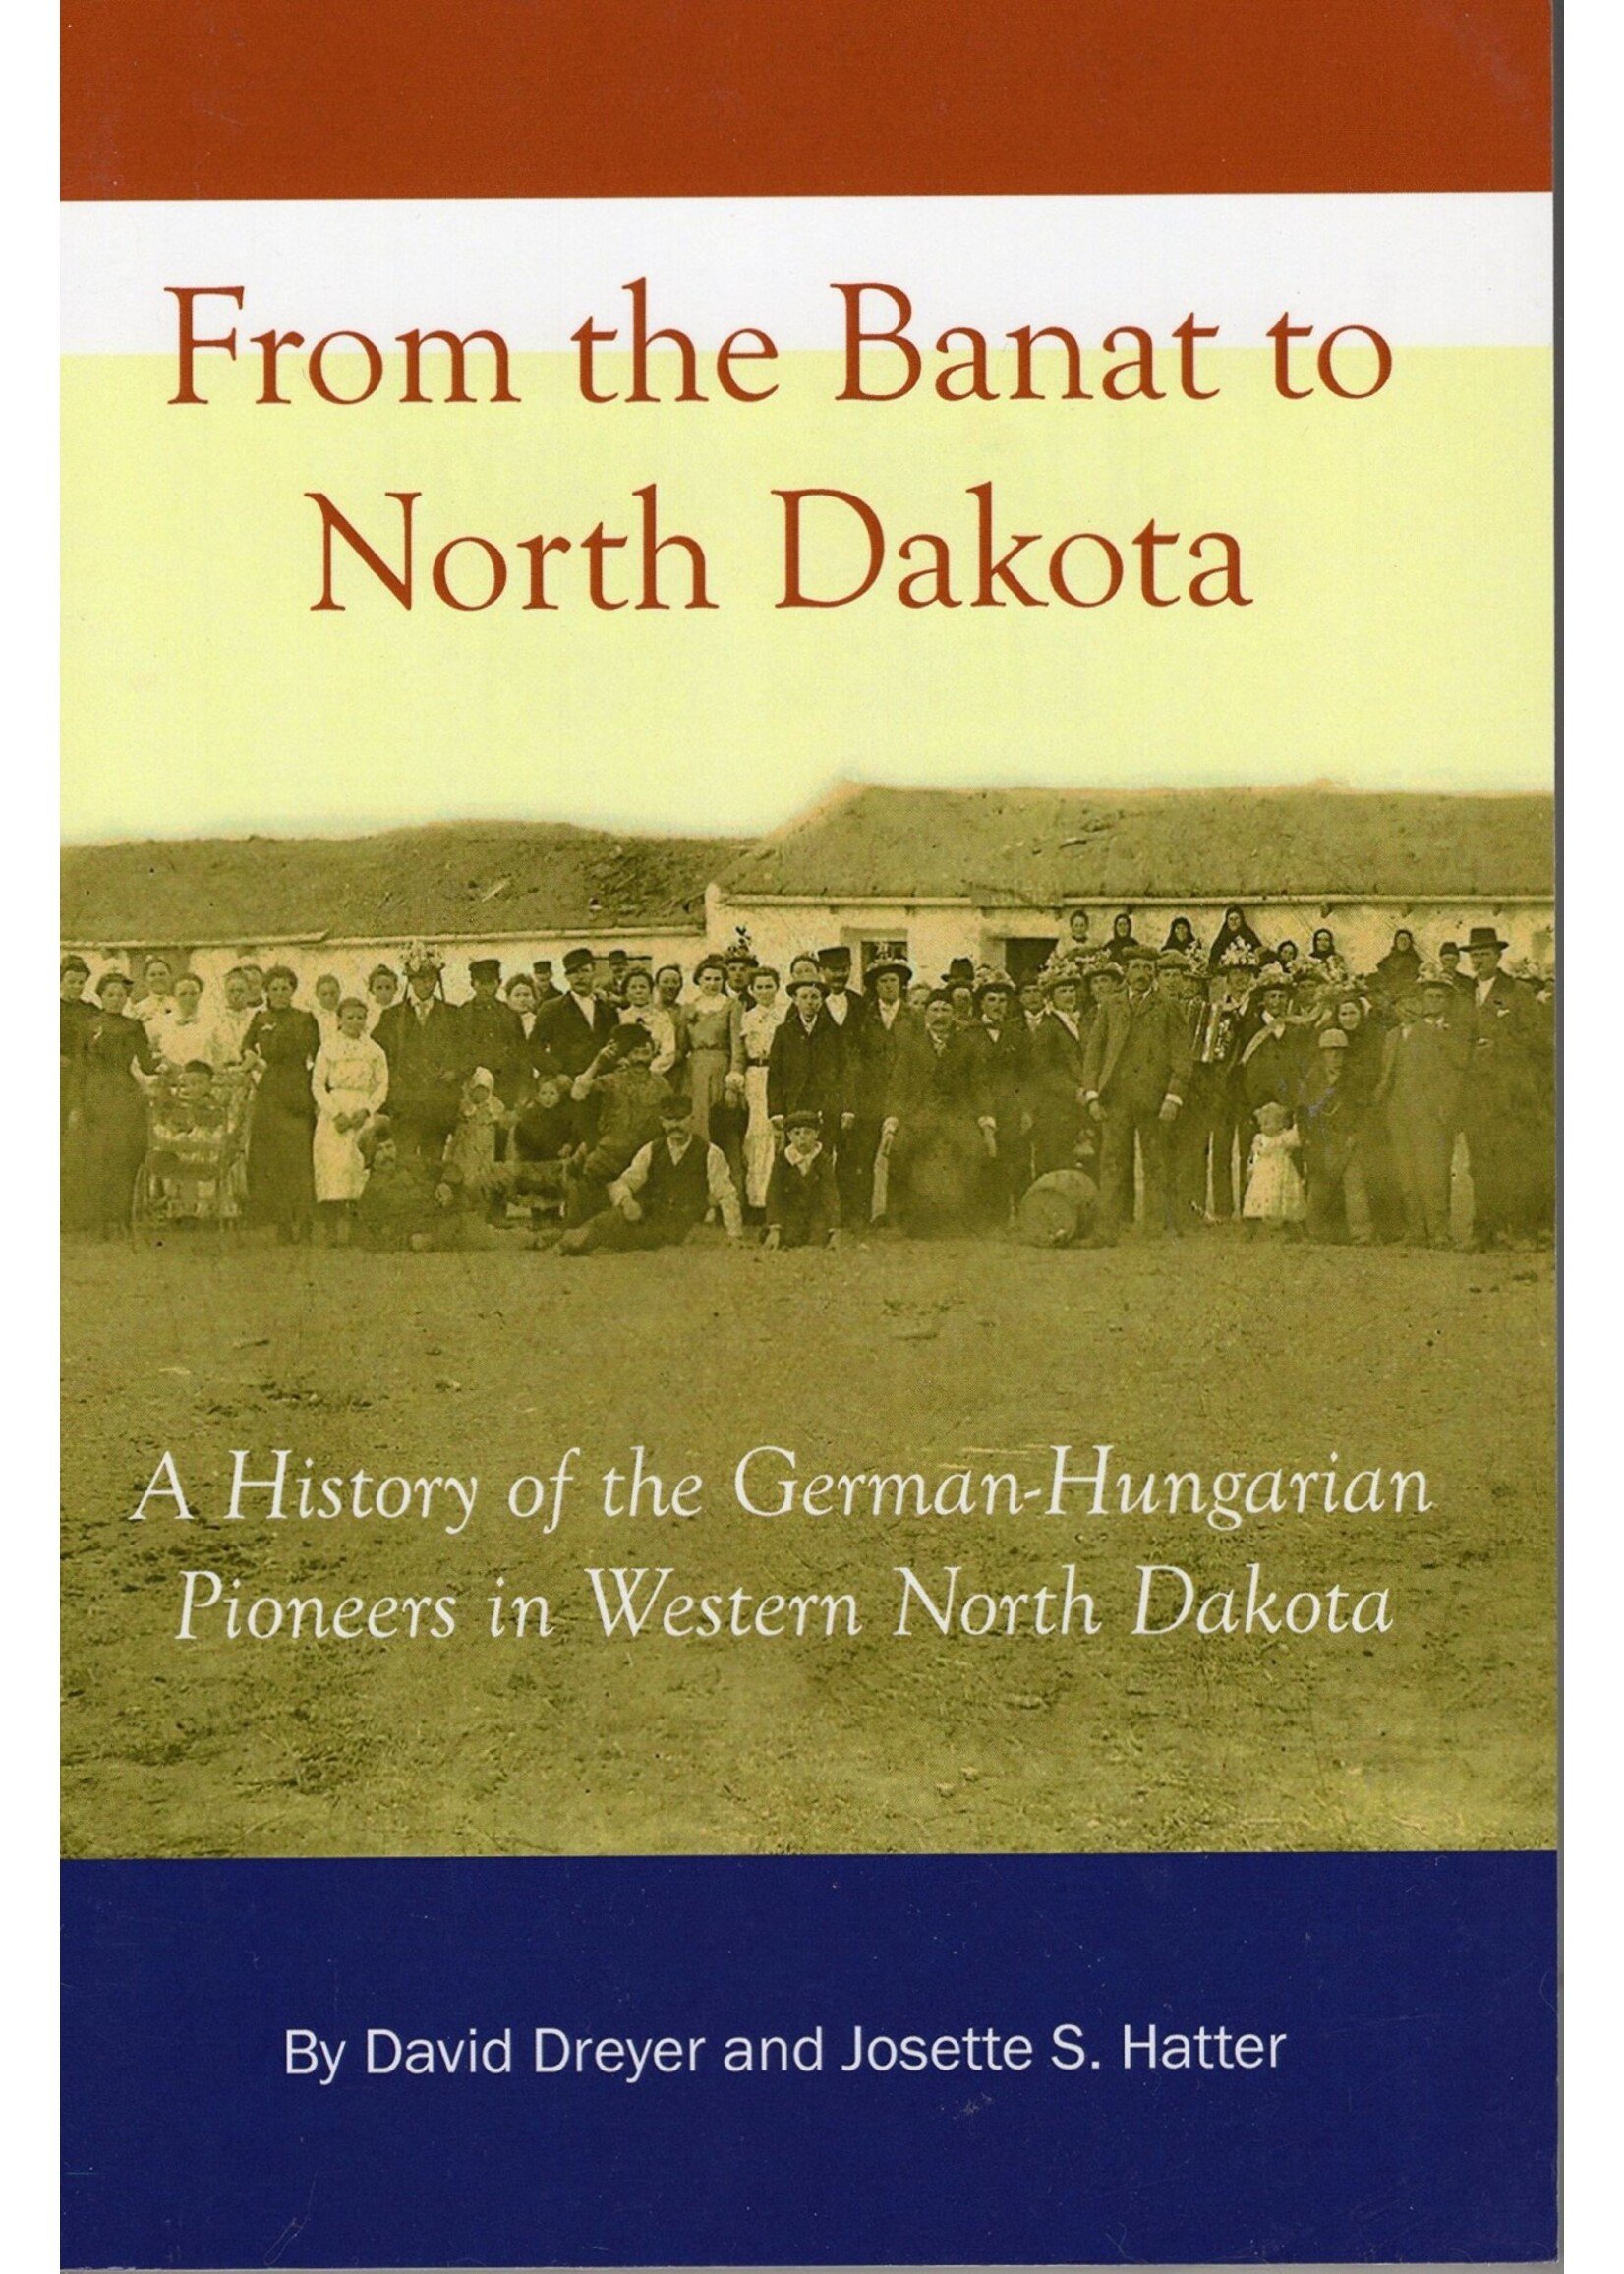 From the Banat to North Dakota: A History of the German-Hungarian Pioneers in Western North Dakota